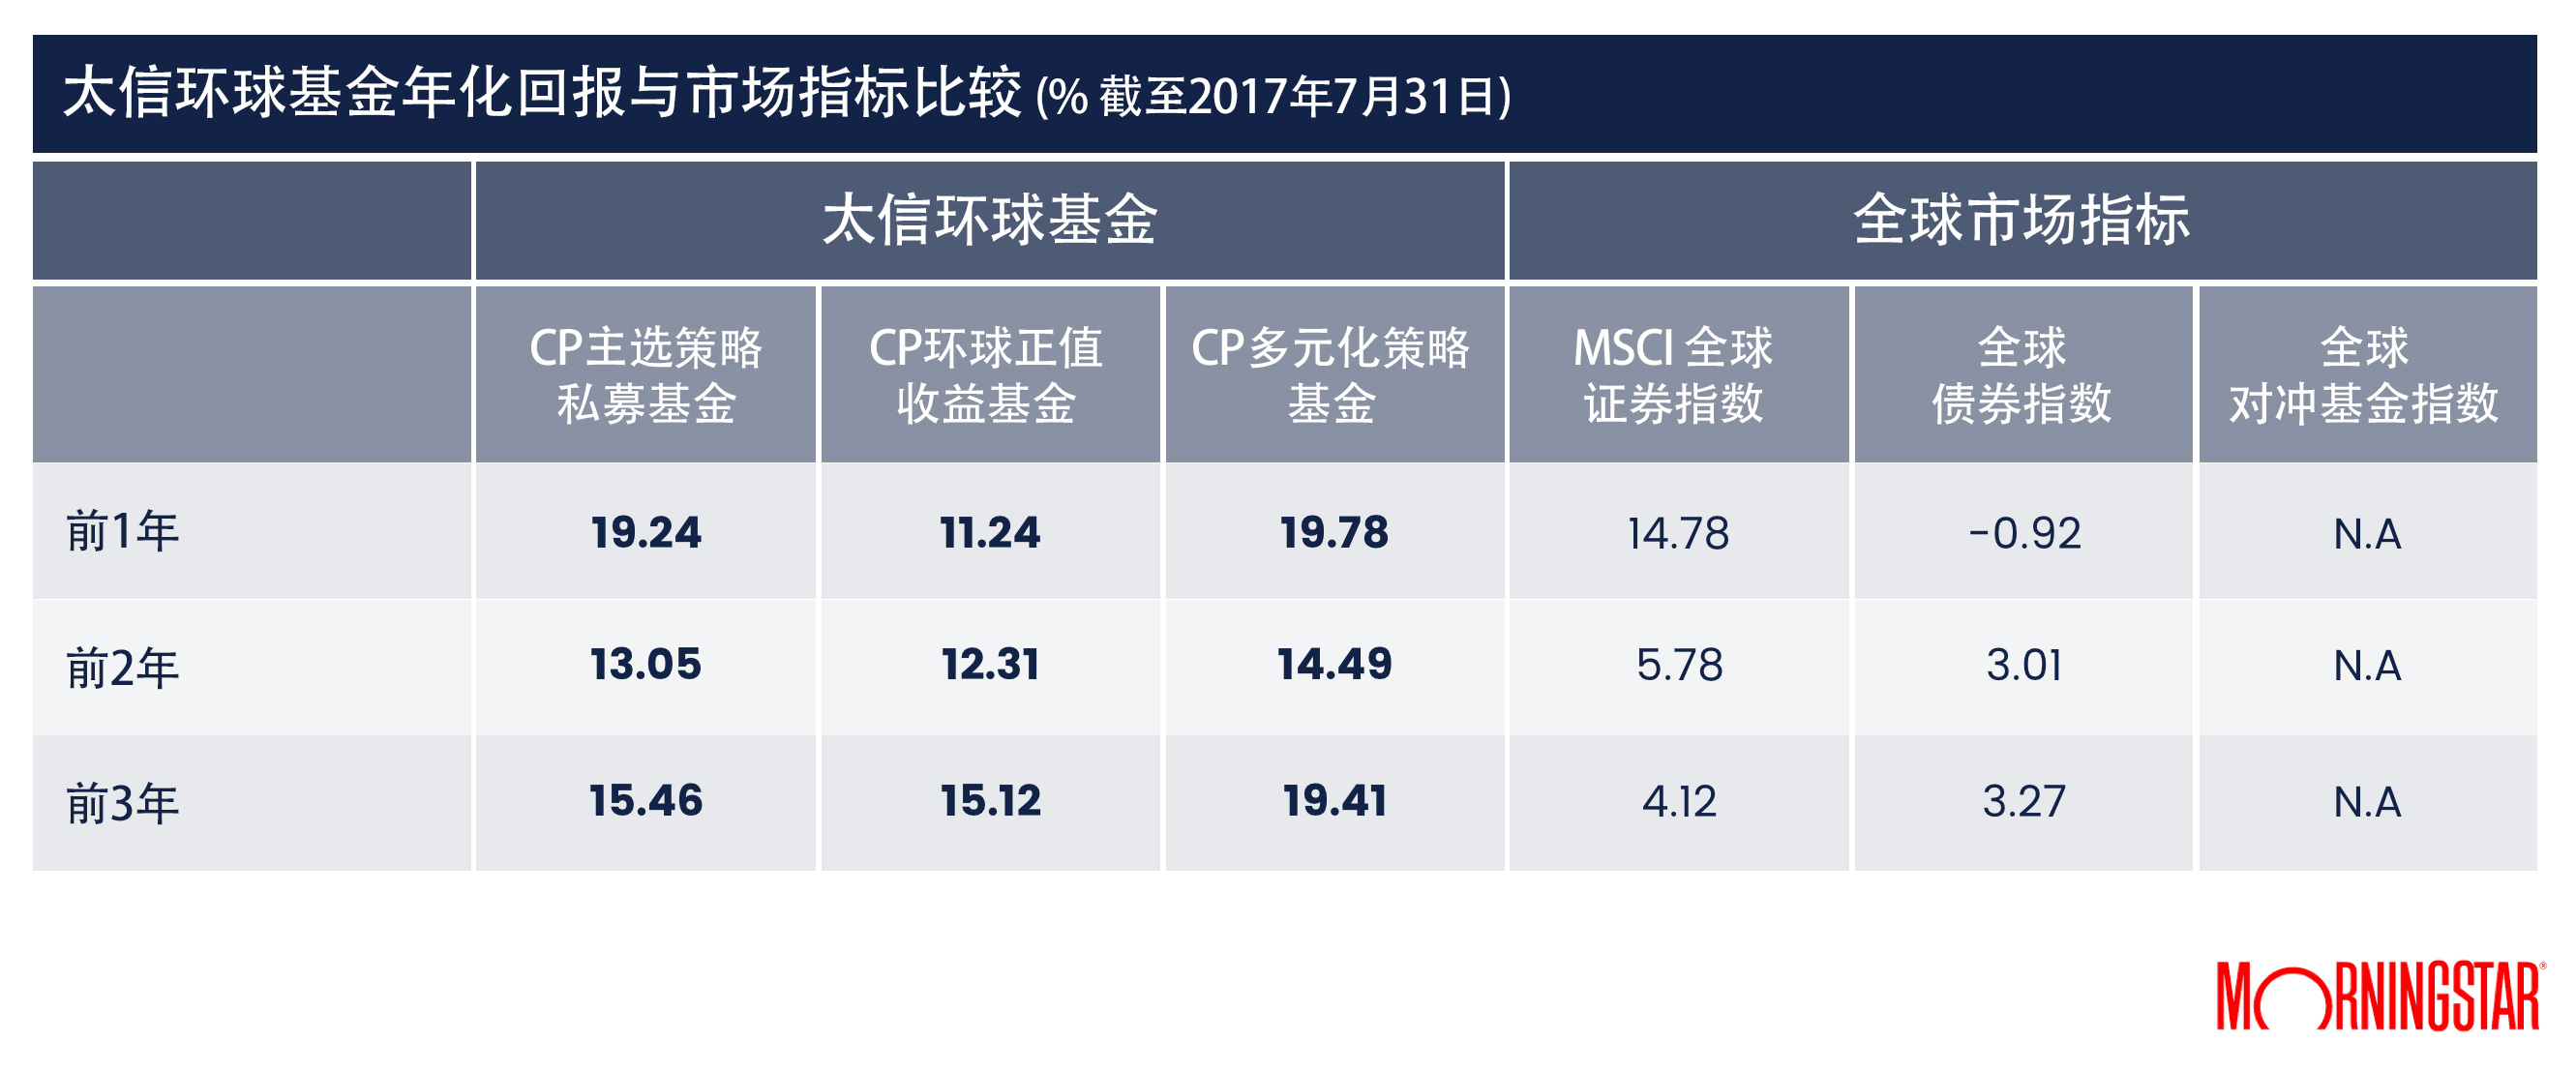 cp-global-funds-annualized-performance-against-benchmarks-31jul2017-chinese